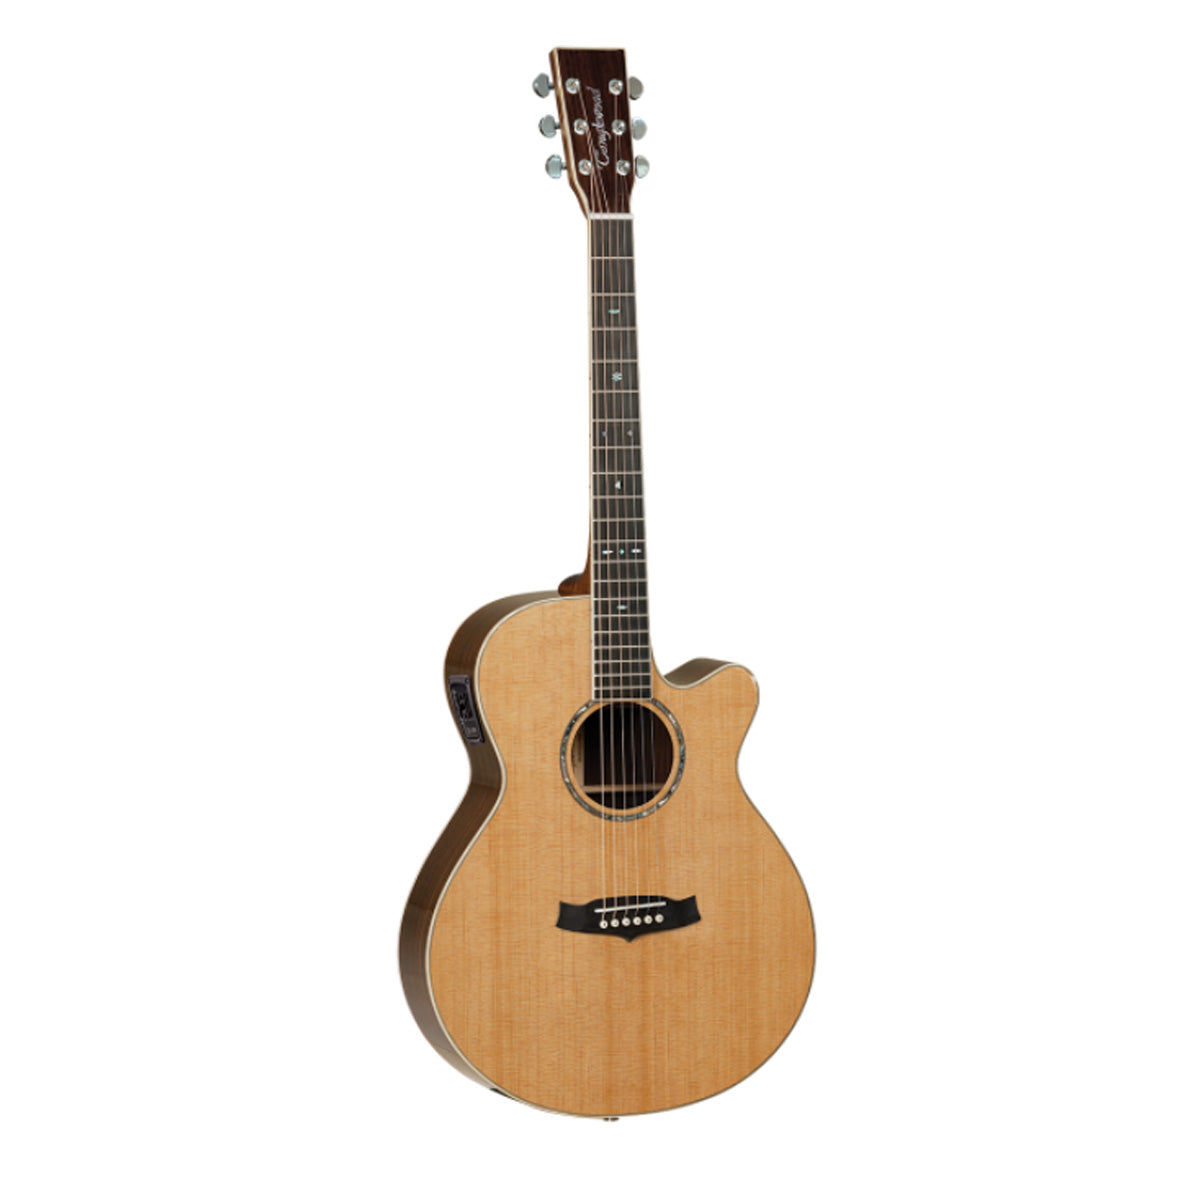 Tanglewood TW45RE Sundance Reserve Acoustic Guitar Super Folk All Solid Natural w/ Pickup & Case